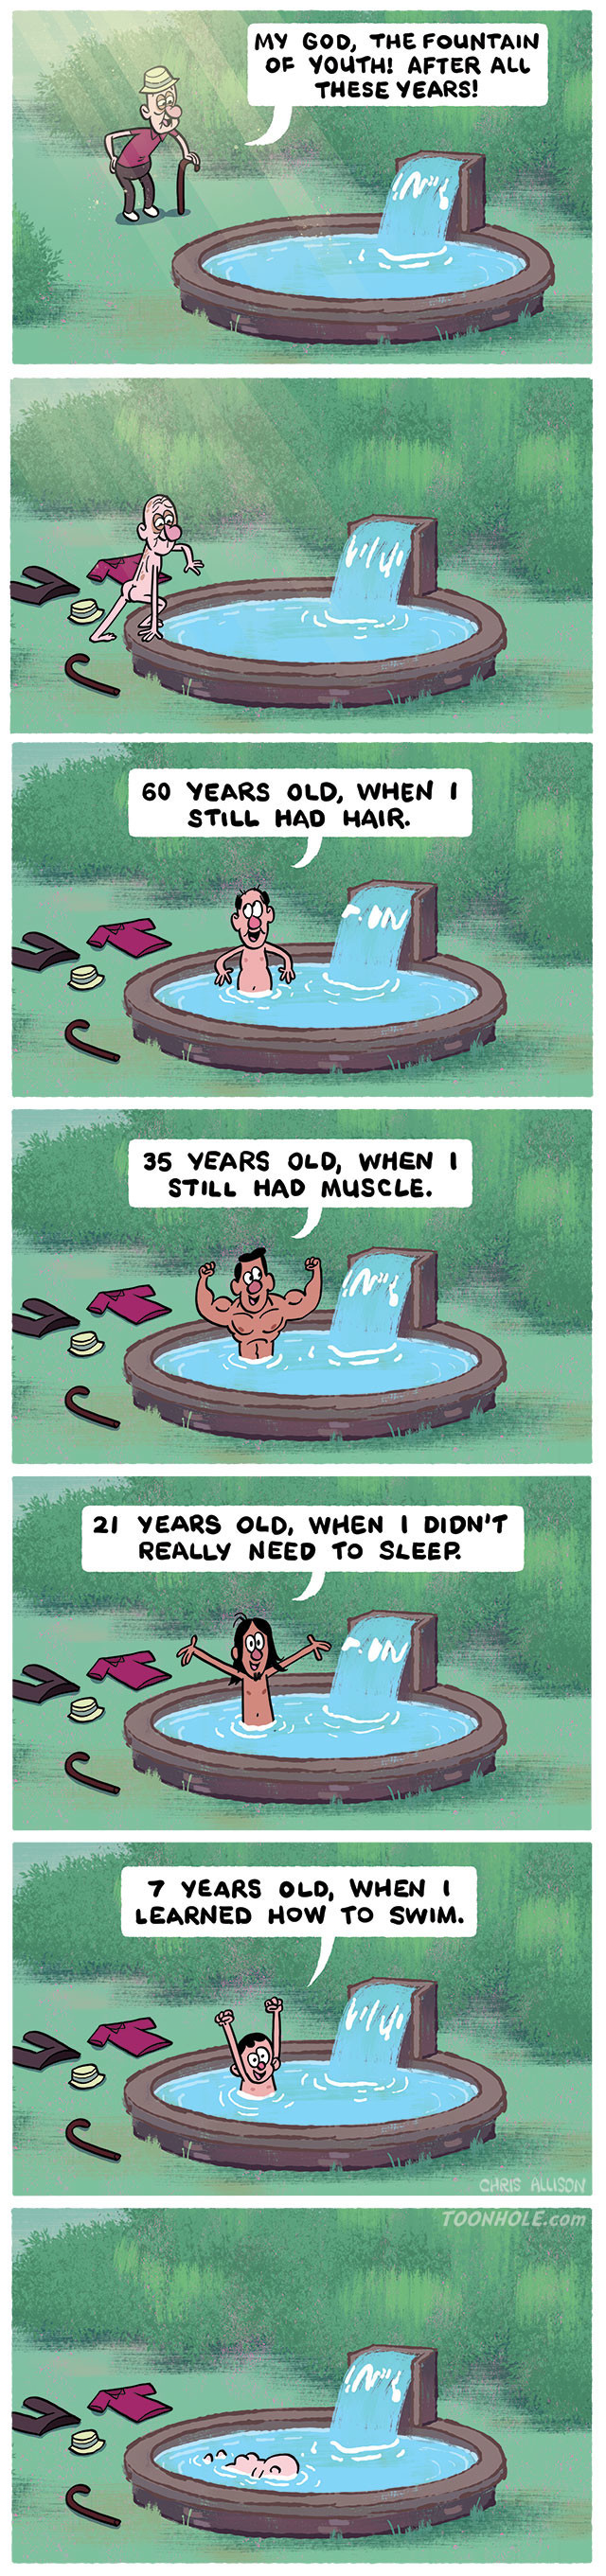 Cartoon Of The Day: Fountain Of Youth